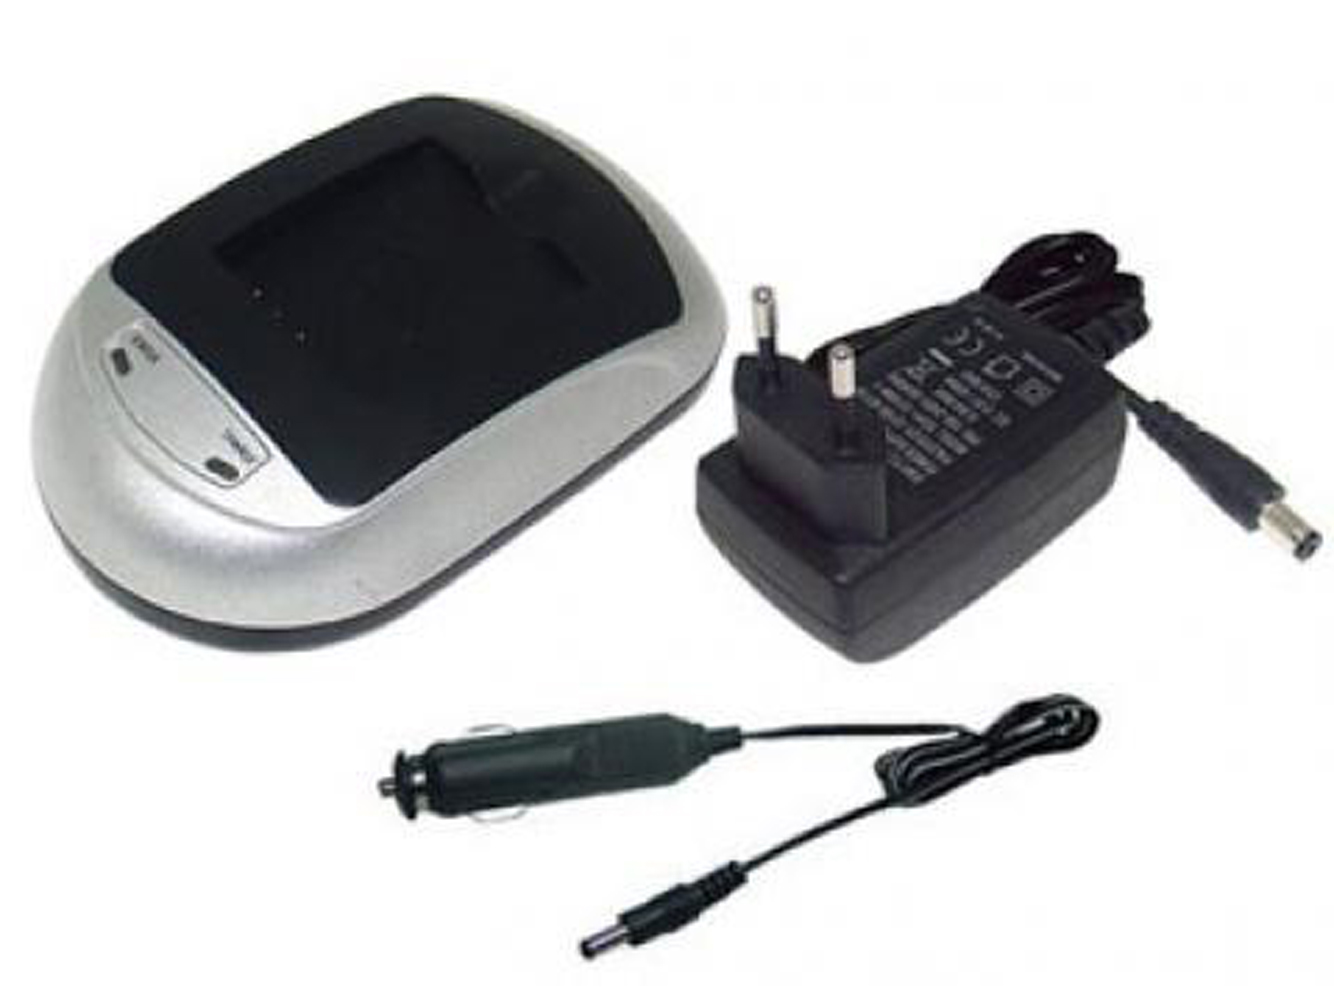 Fujifilm Np-50, Np-50a Battery Chargers For Fujifilm Finepix F100fd, Fujifilm Finepix F200exr replacement